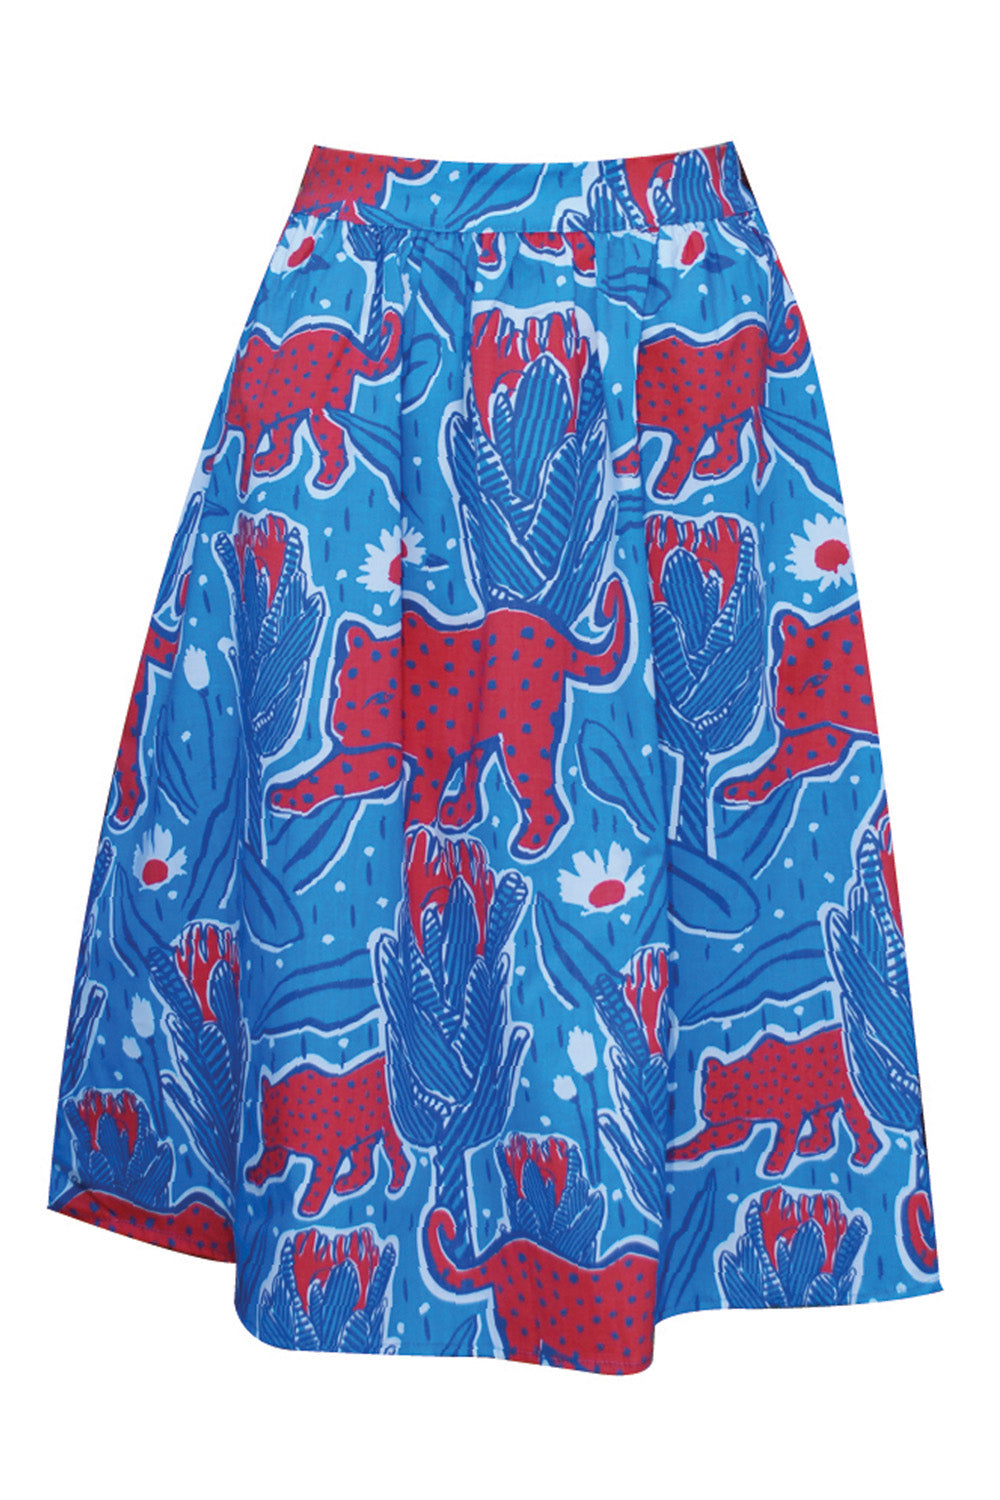 Gathered skirt with blue and red jaguar and protea print